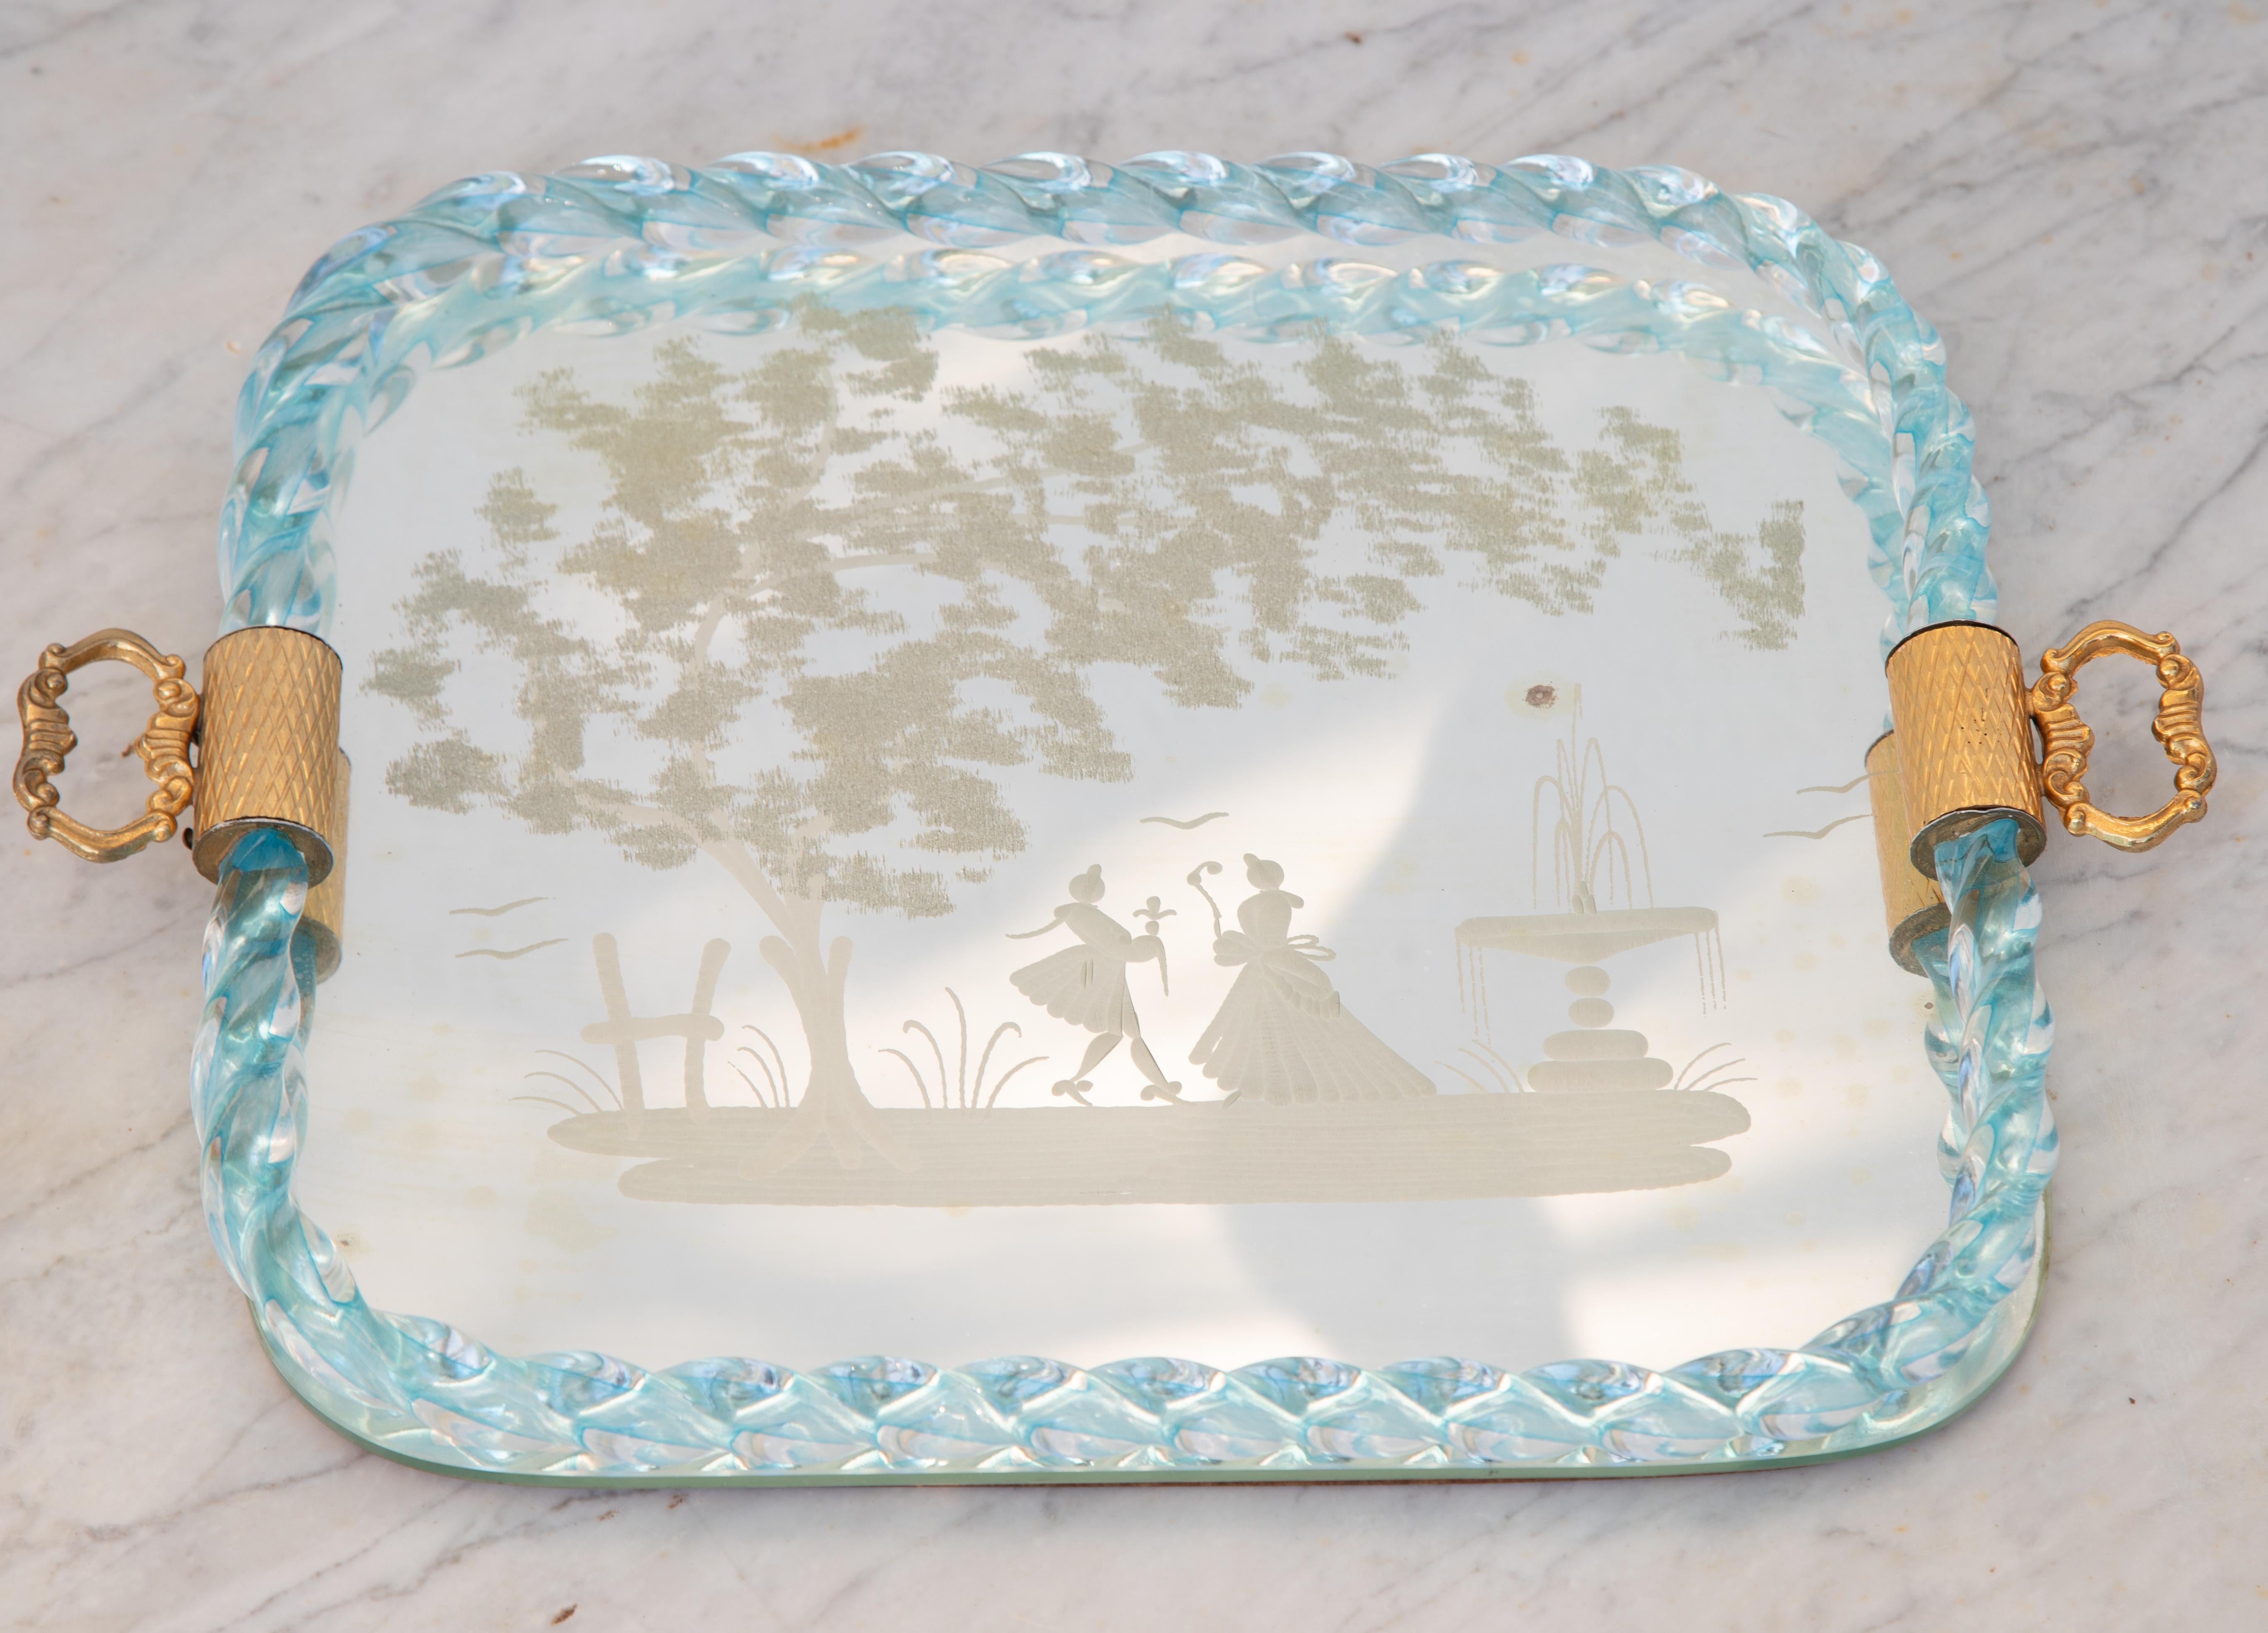 Ercole Barovier Mirror-Engraved Murano Glass Italian Serving Tray, 1940s For Sale 5